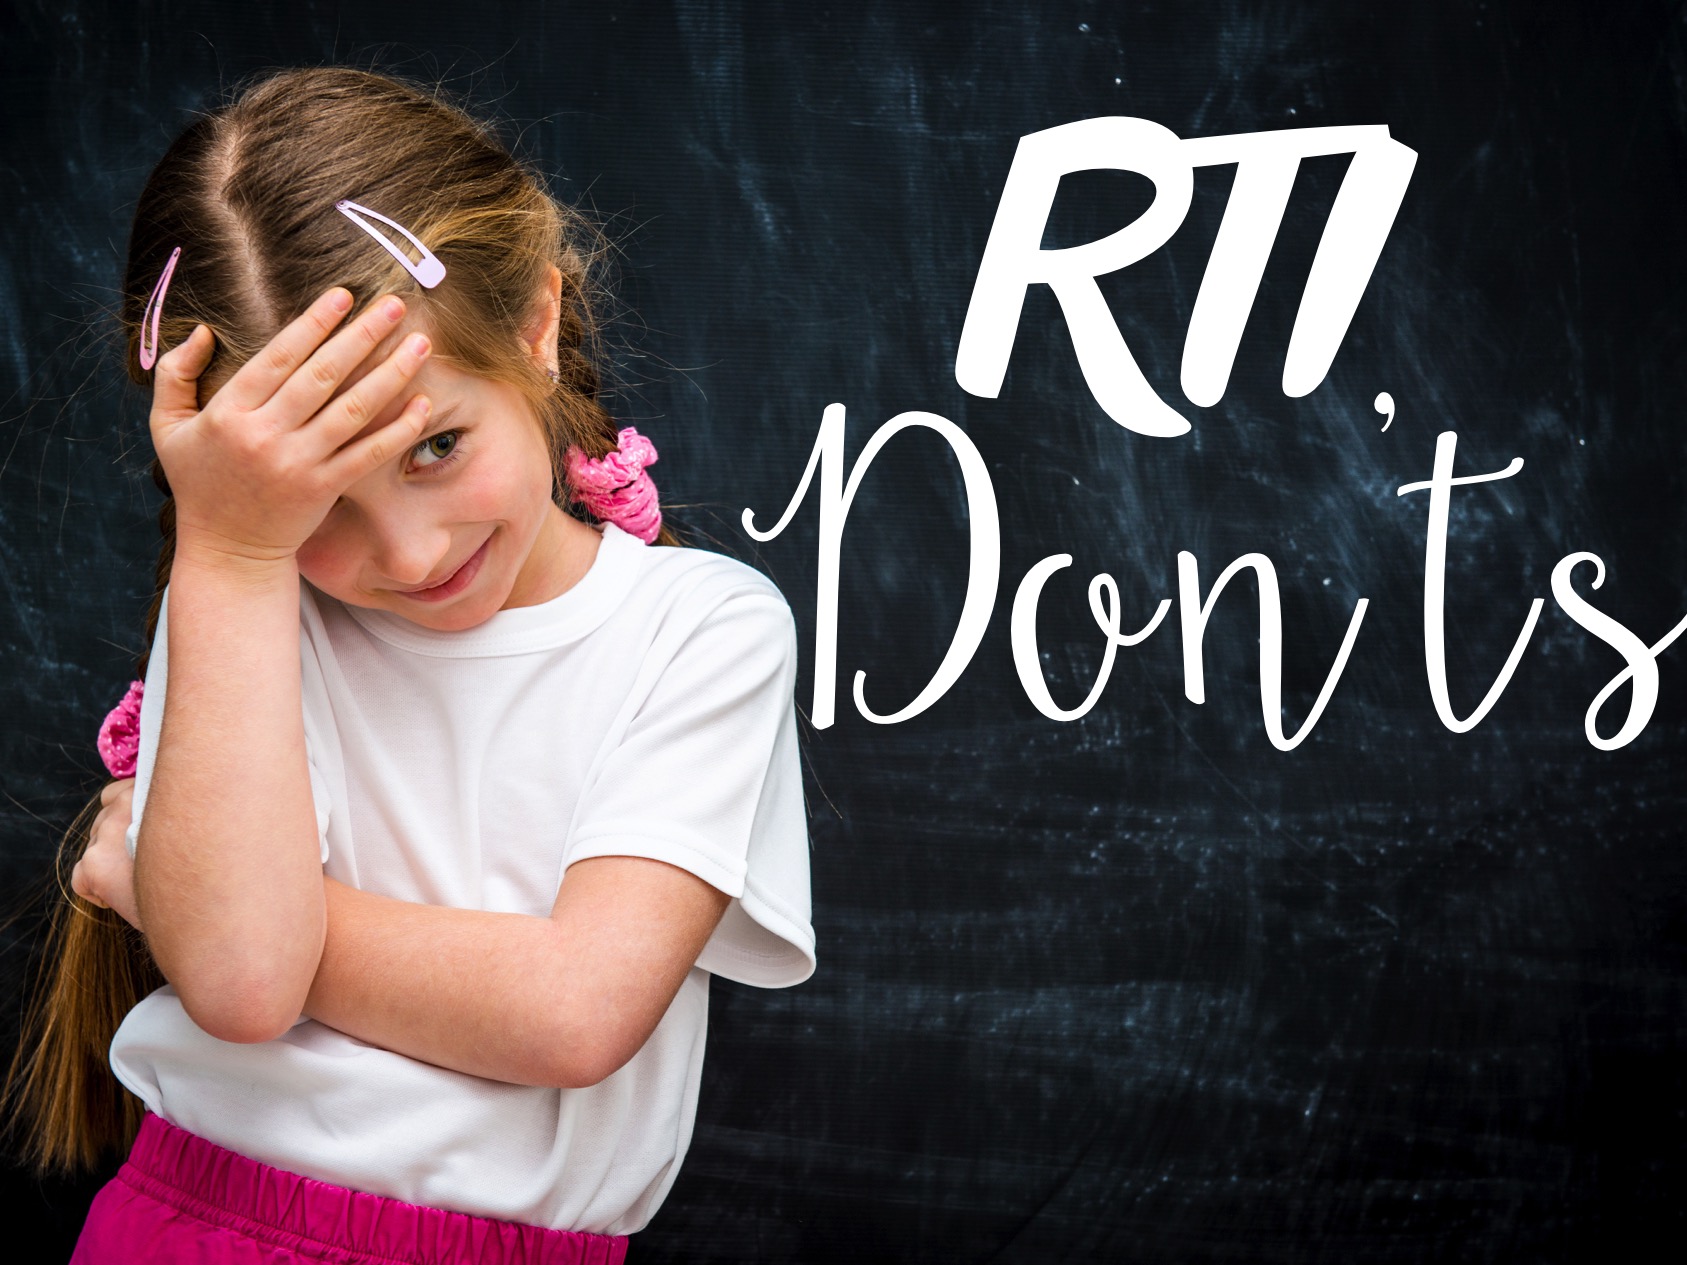 As an intervention specialist, I get lots of questions regarding rti interventions, rti forms, setting goals,  and intervention ideas.  Let's clear up some RTI and intervention mistakes.